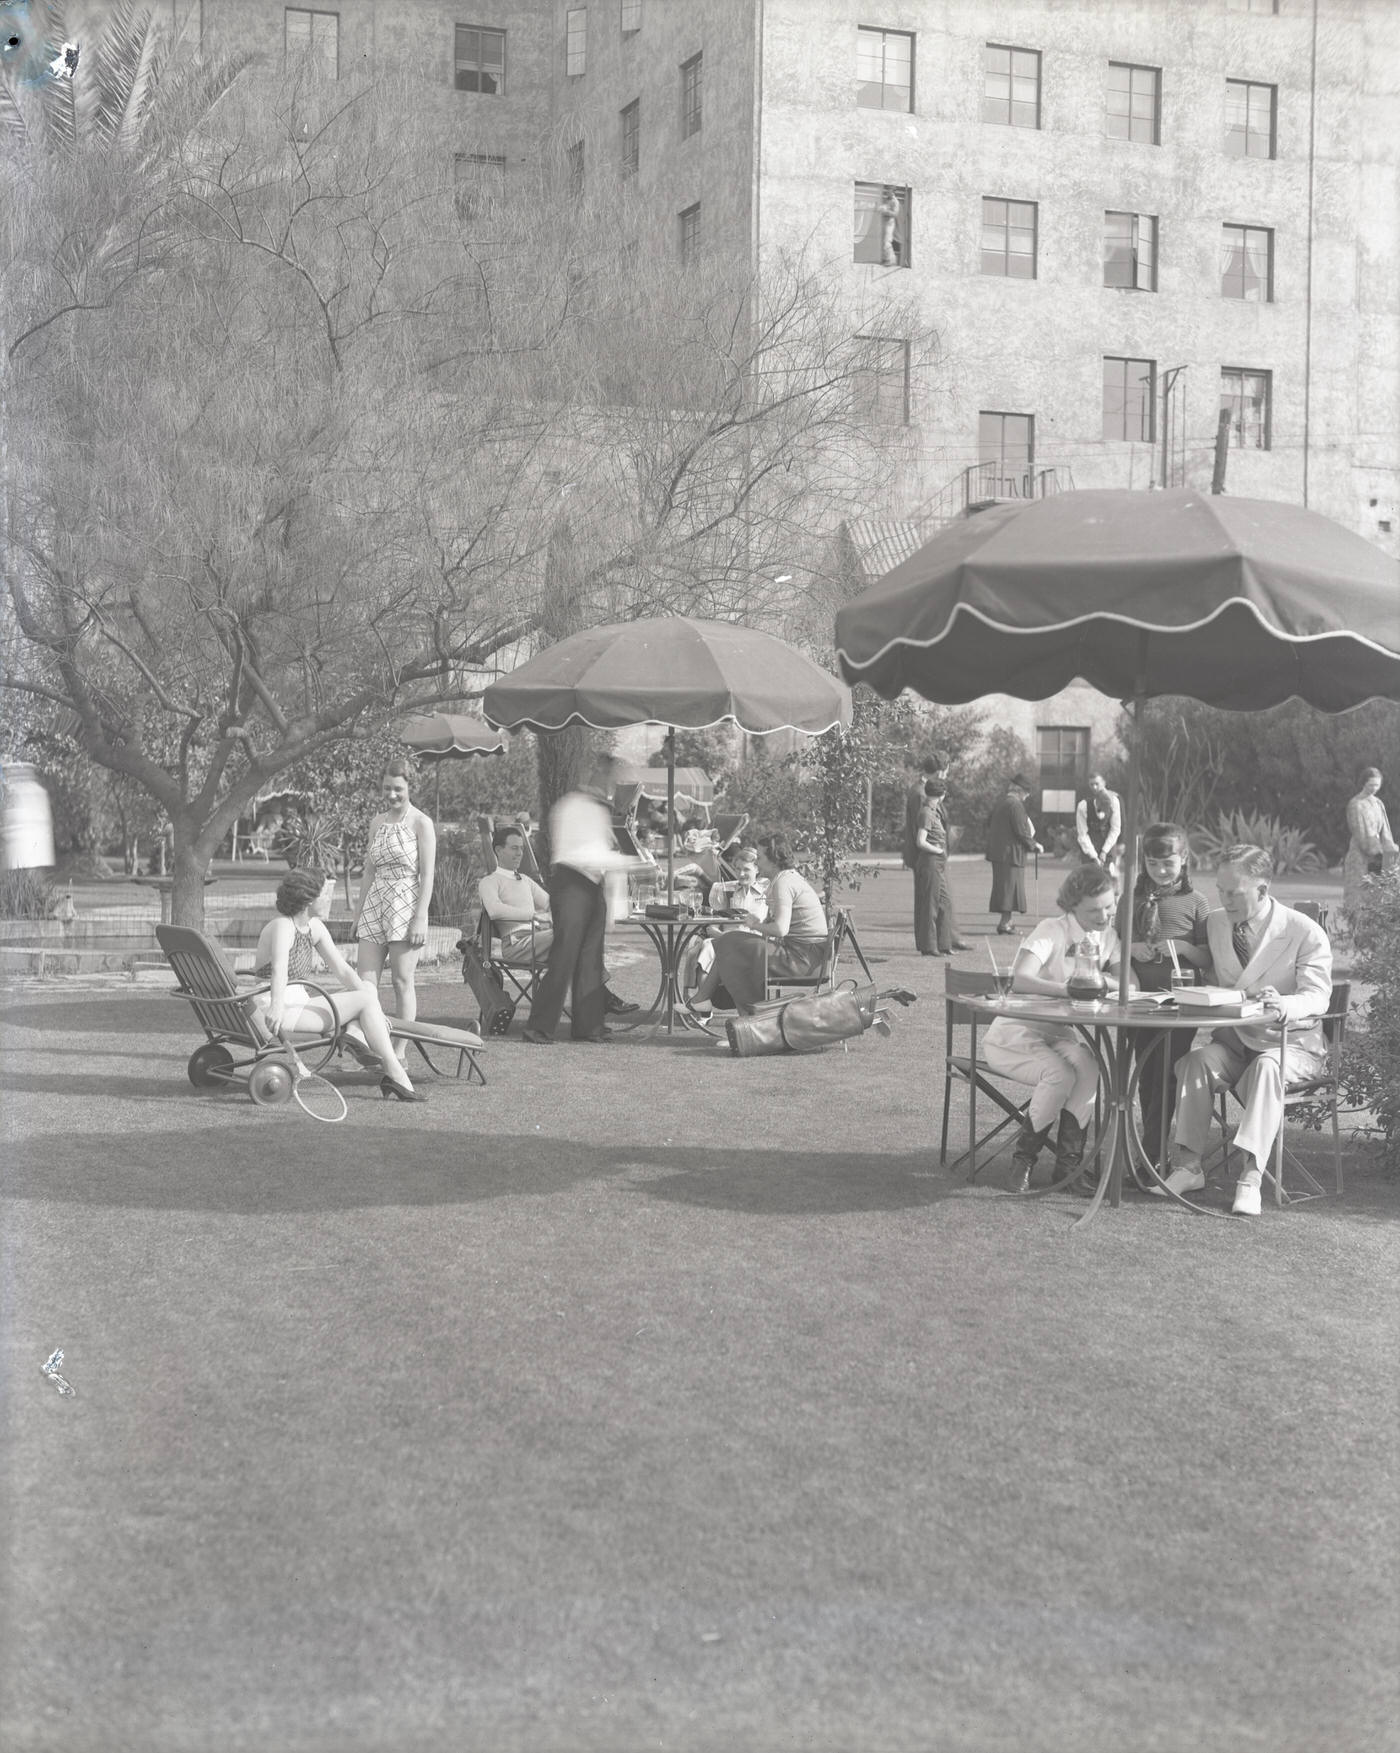 Westward Ho Hotel Guests on Grounds, 1930s